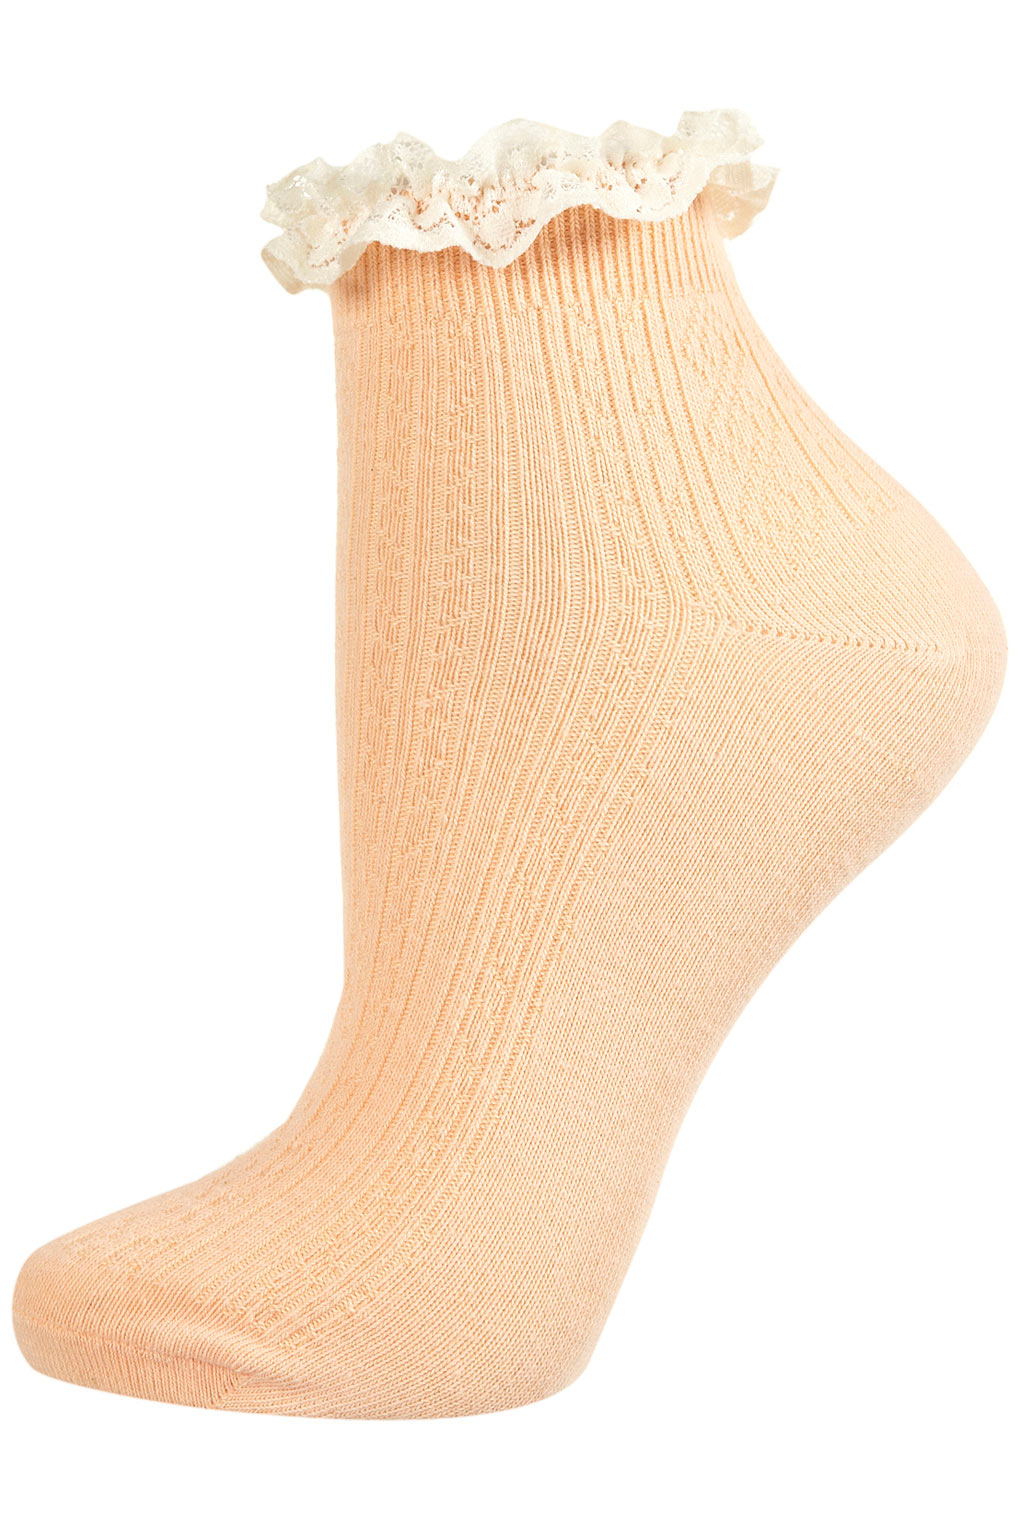 Lyst - Topshop Peach Lace Trim Ankle Socks in Pink